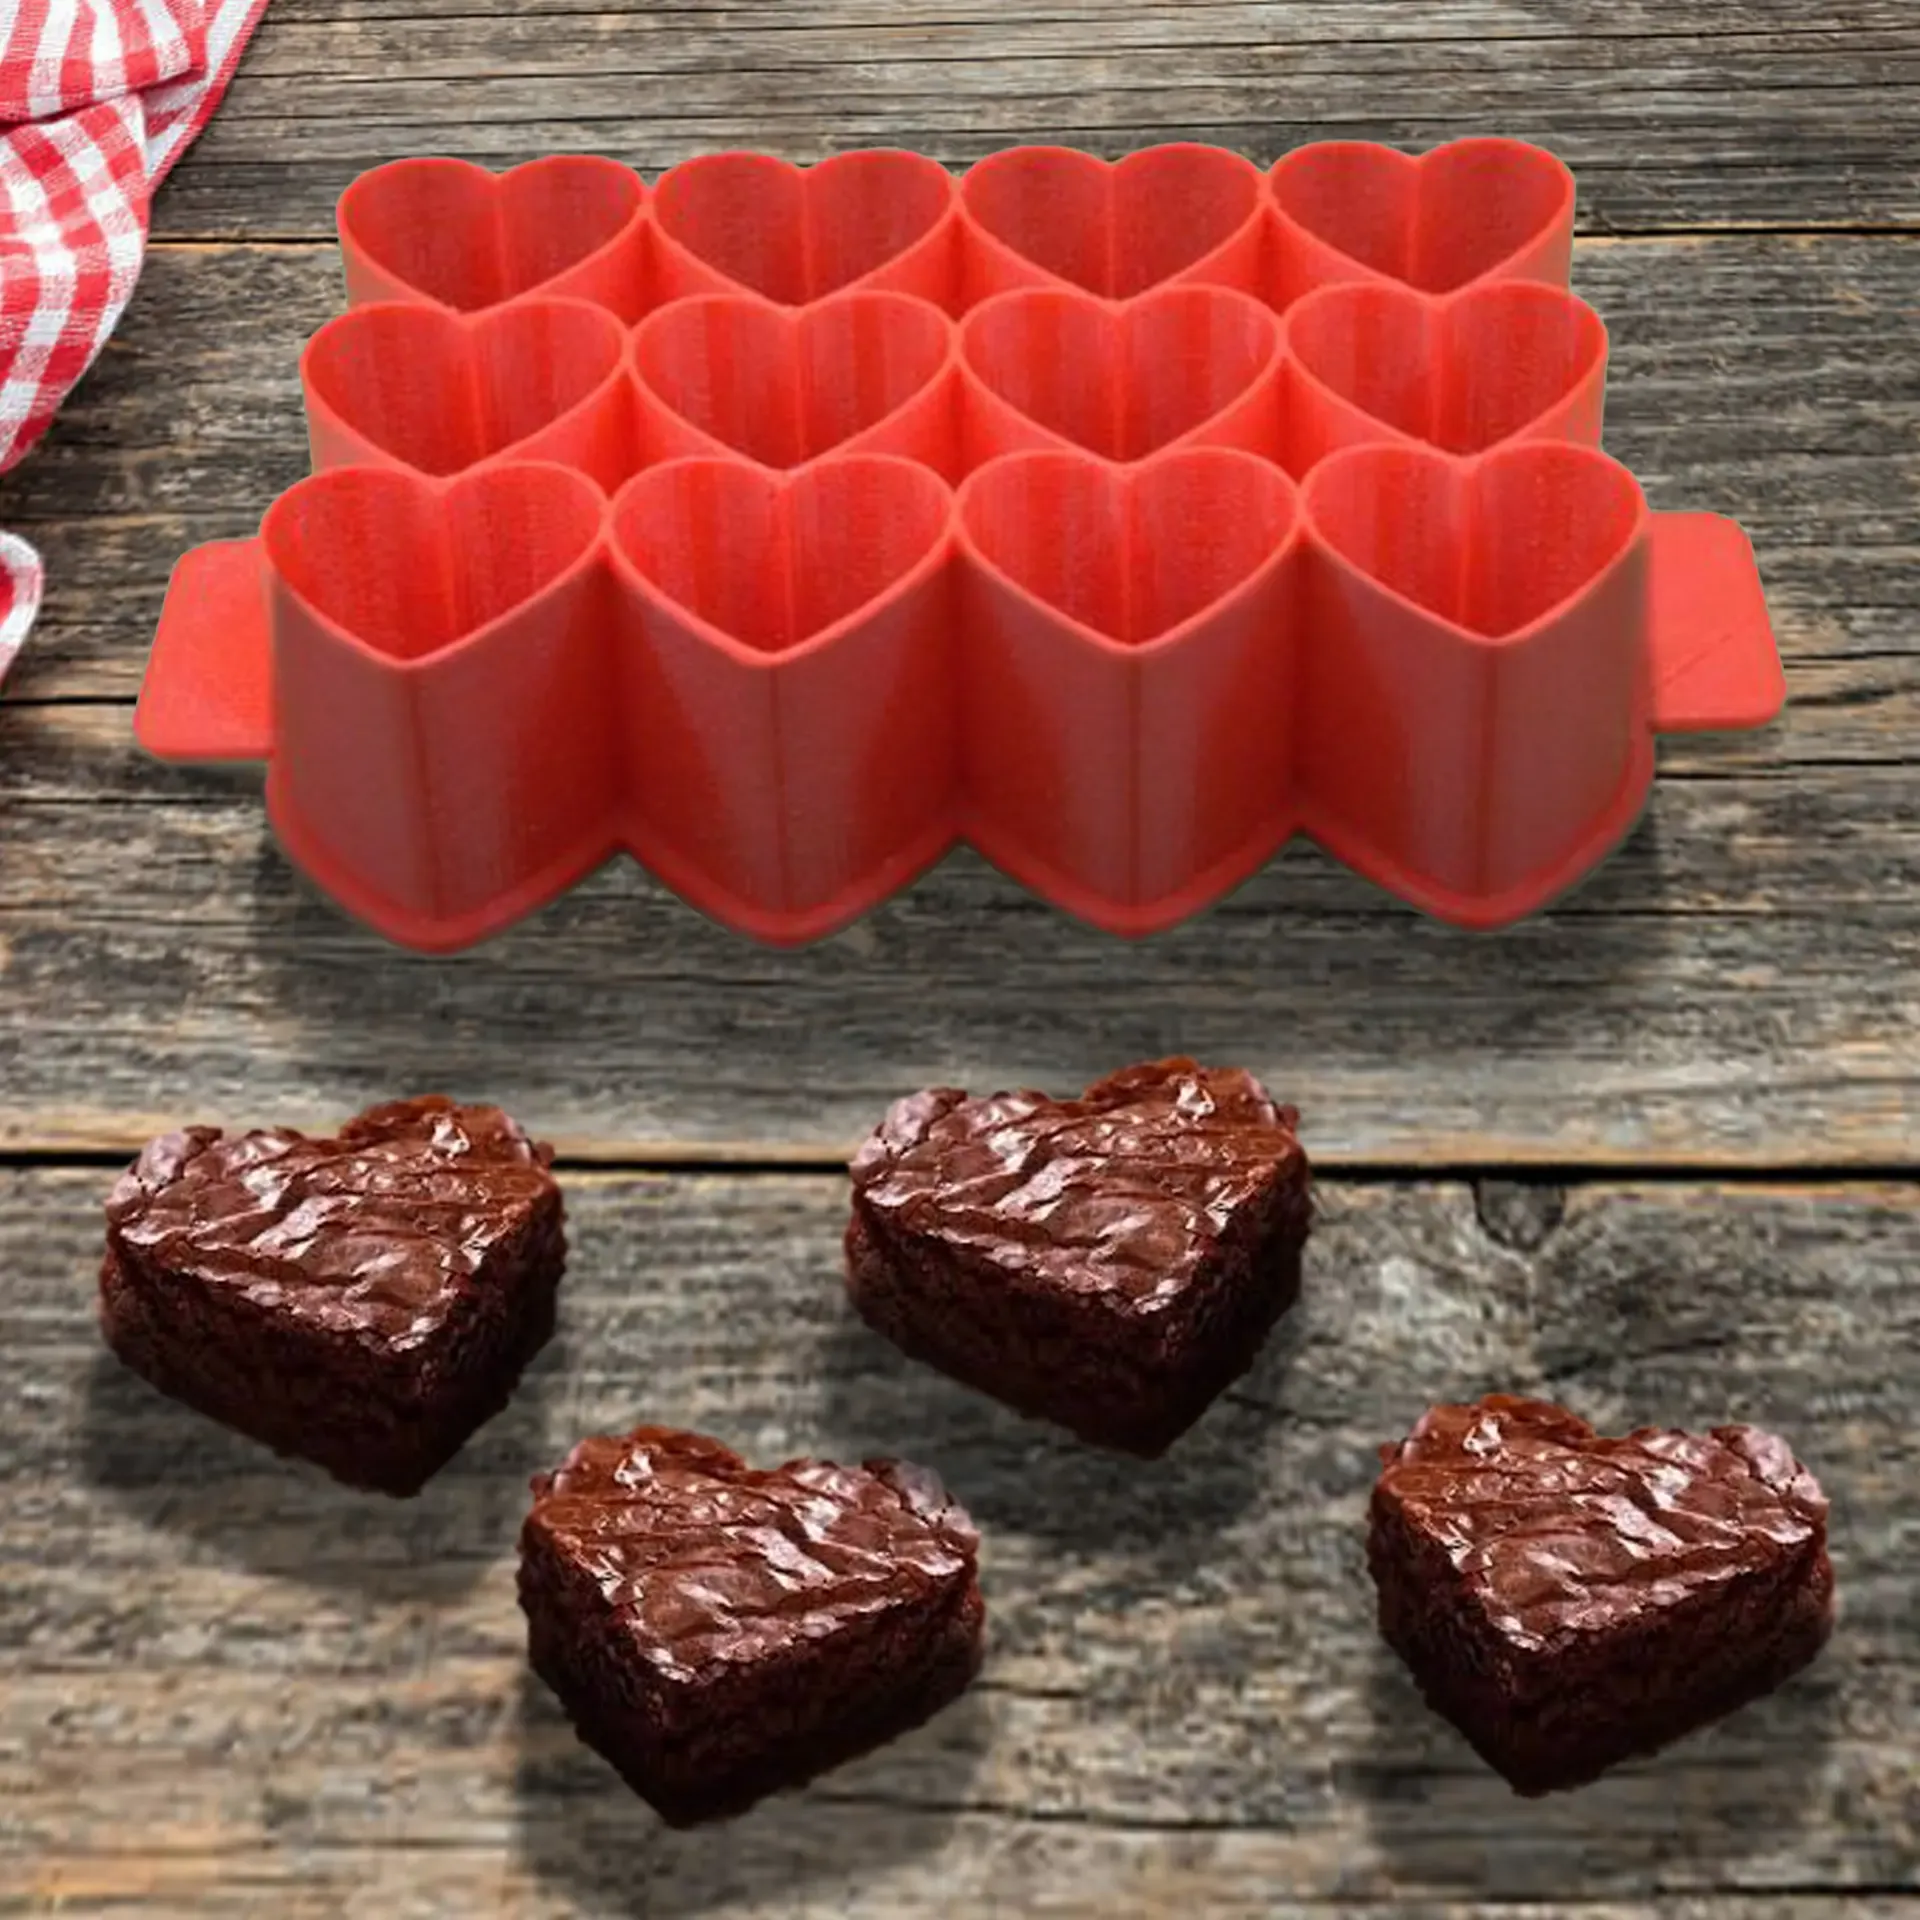 BROWNIES AND COOKIES CUTTER - HEART SHAPE - 12 CAVITIES